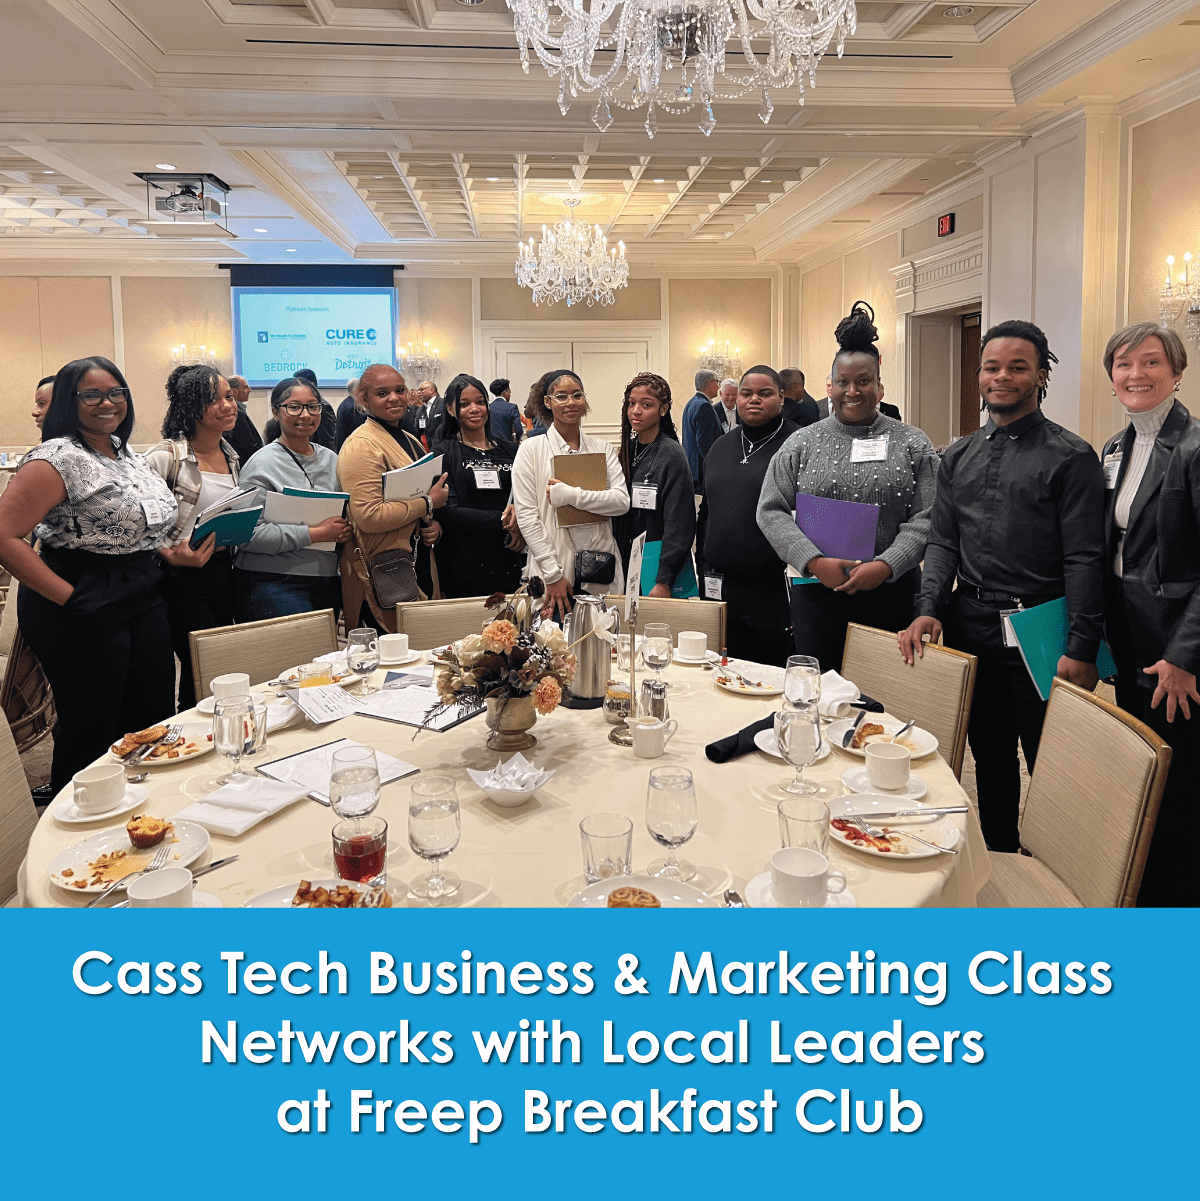 Cass Tech Business & Marketing Class Networks with Local Leaders at Freep Breakfast Club